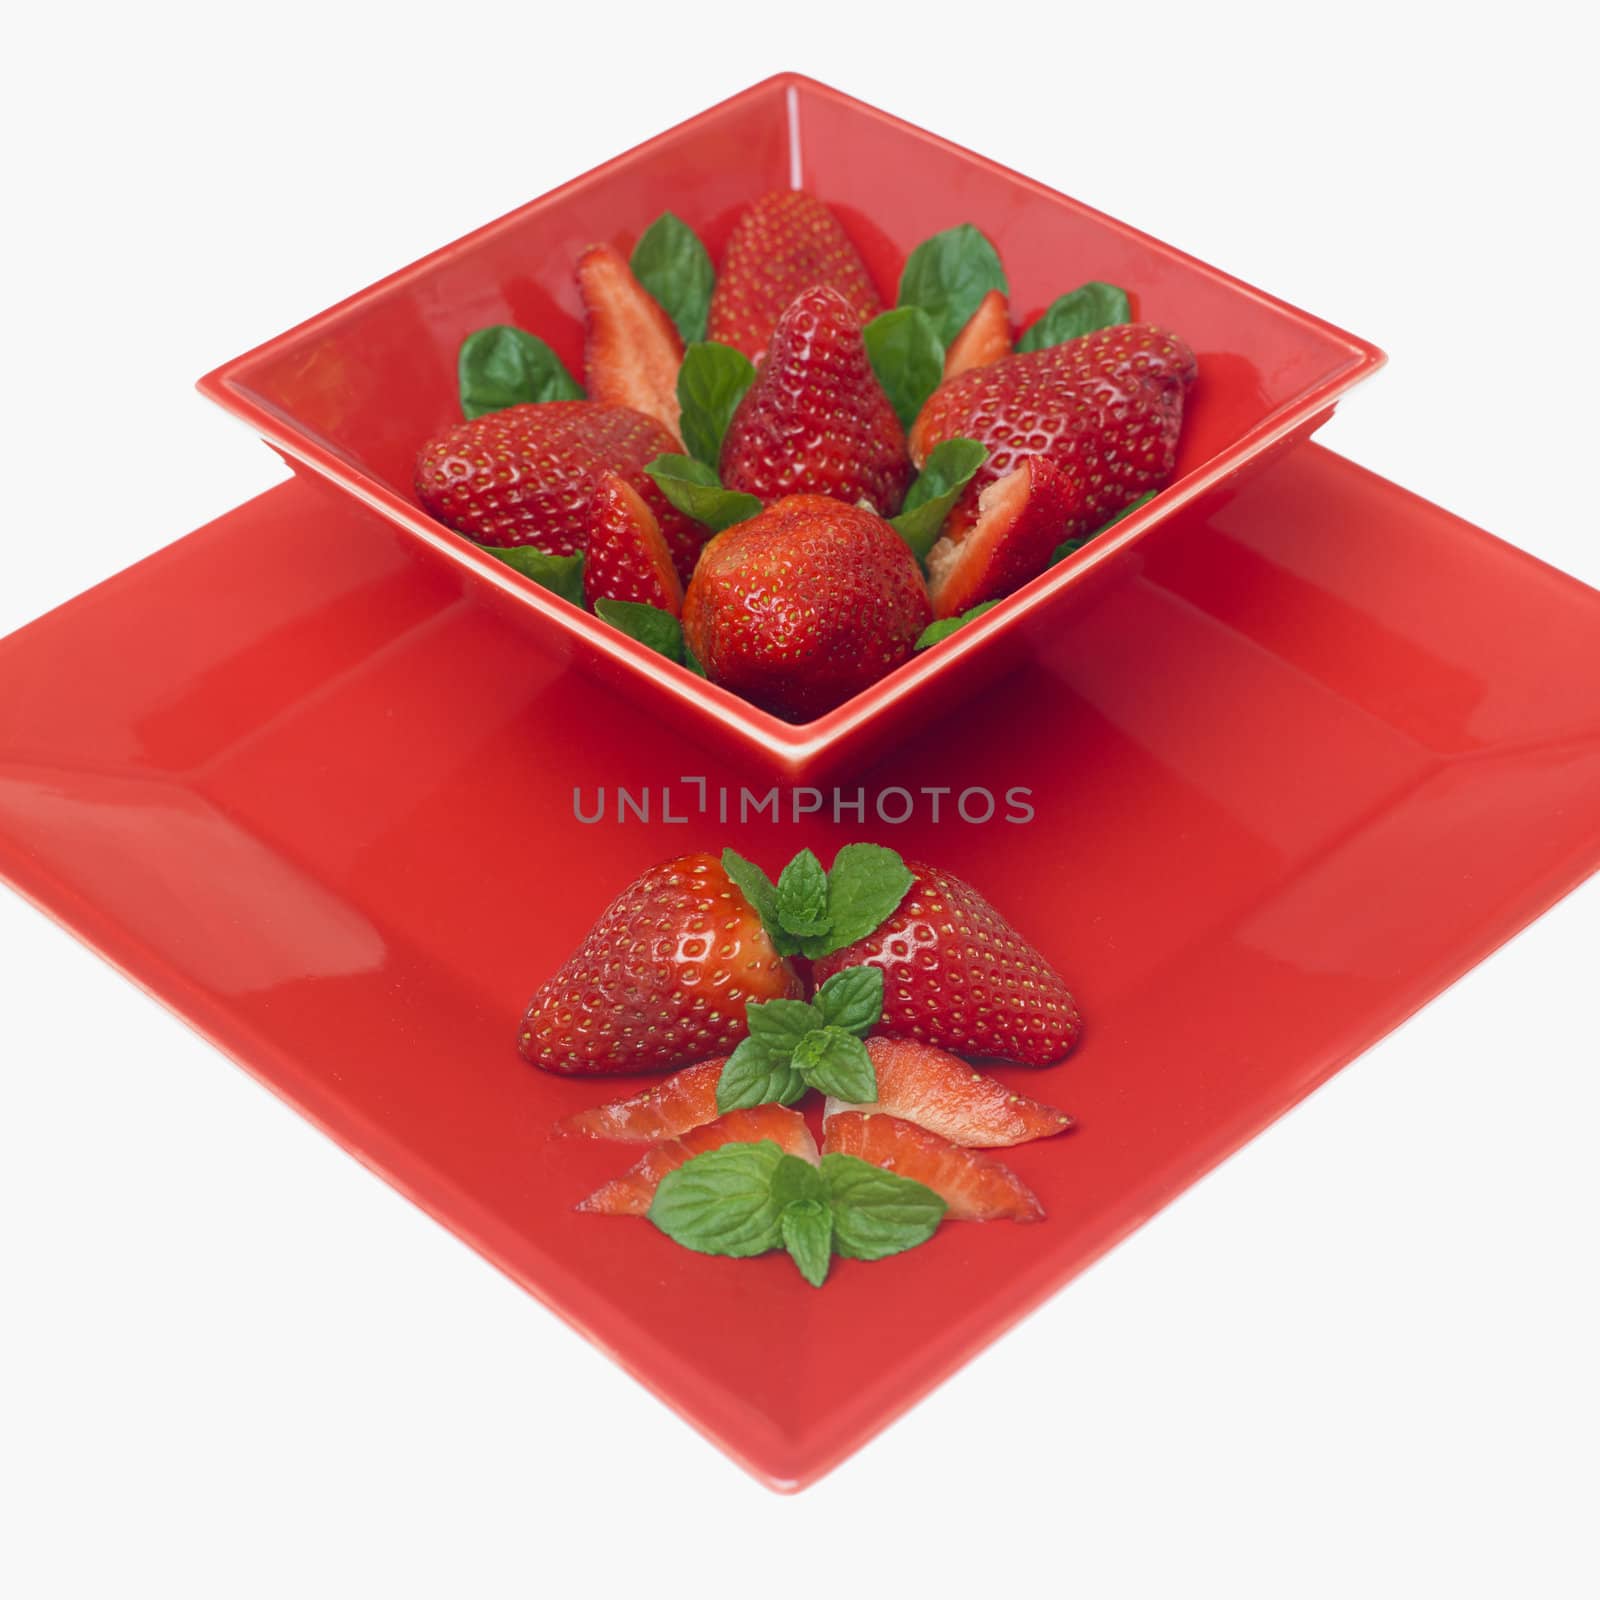 strawberries with mint leaves